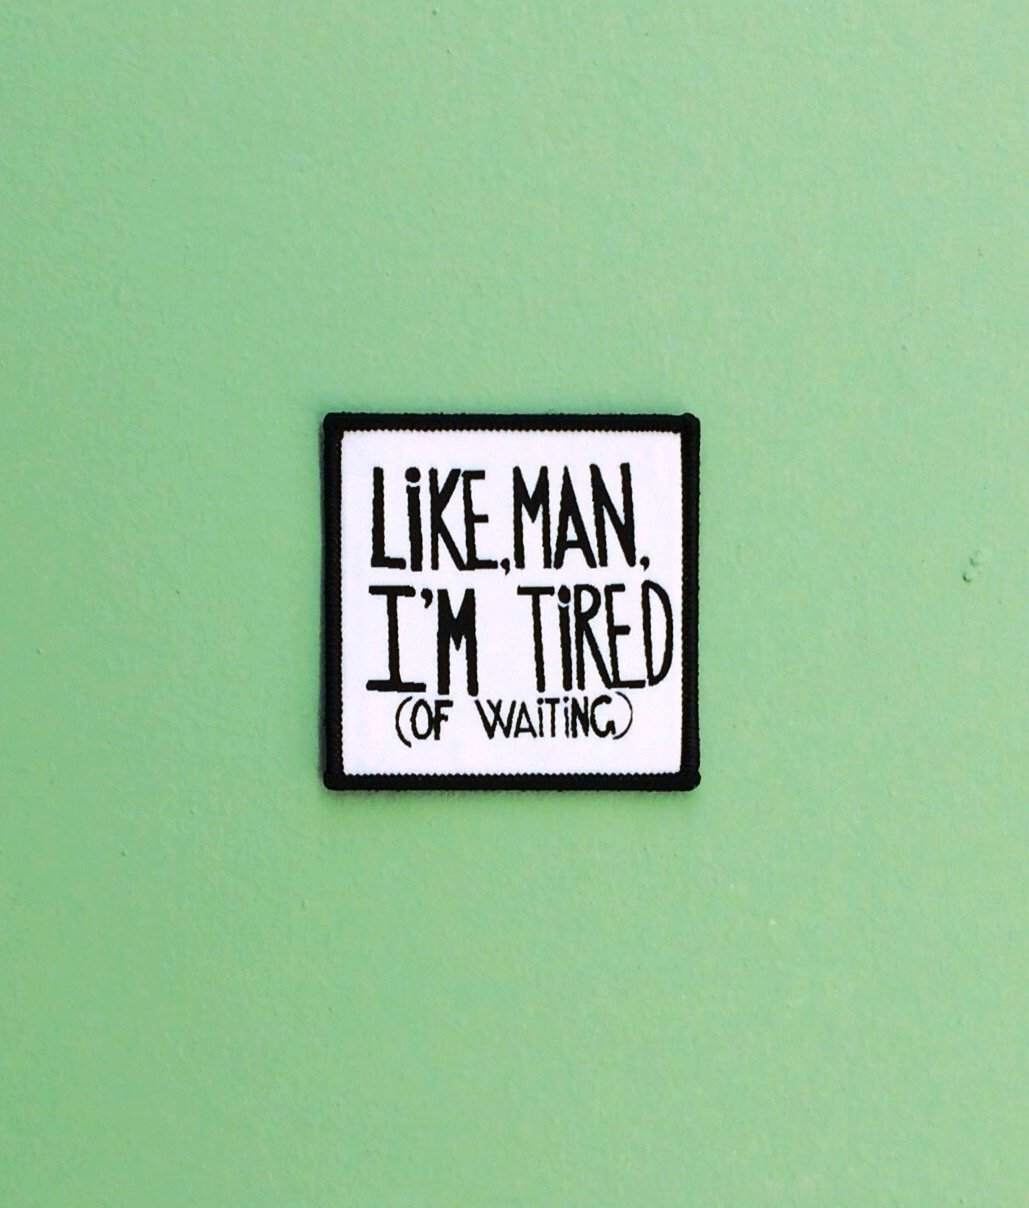 Like man, I'm tired (of waiting) patch